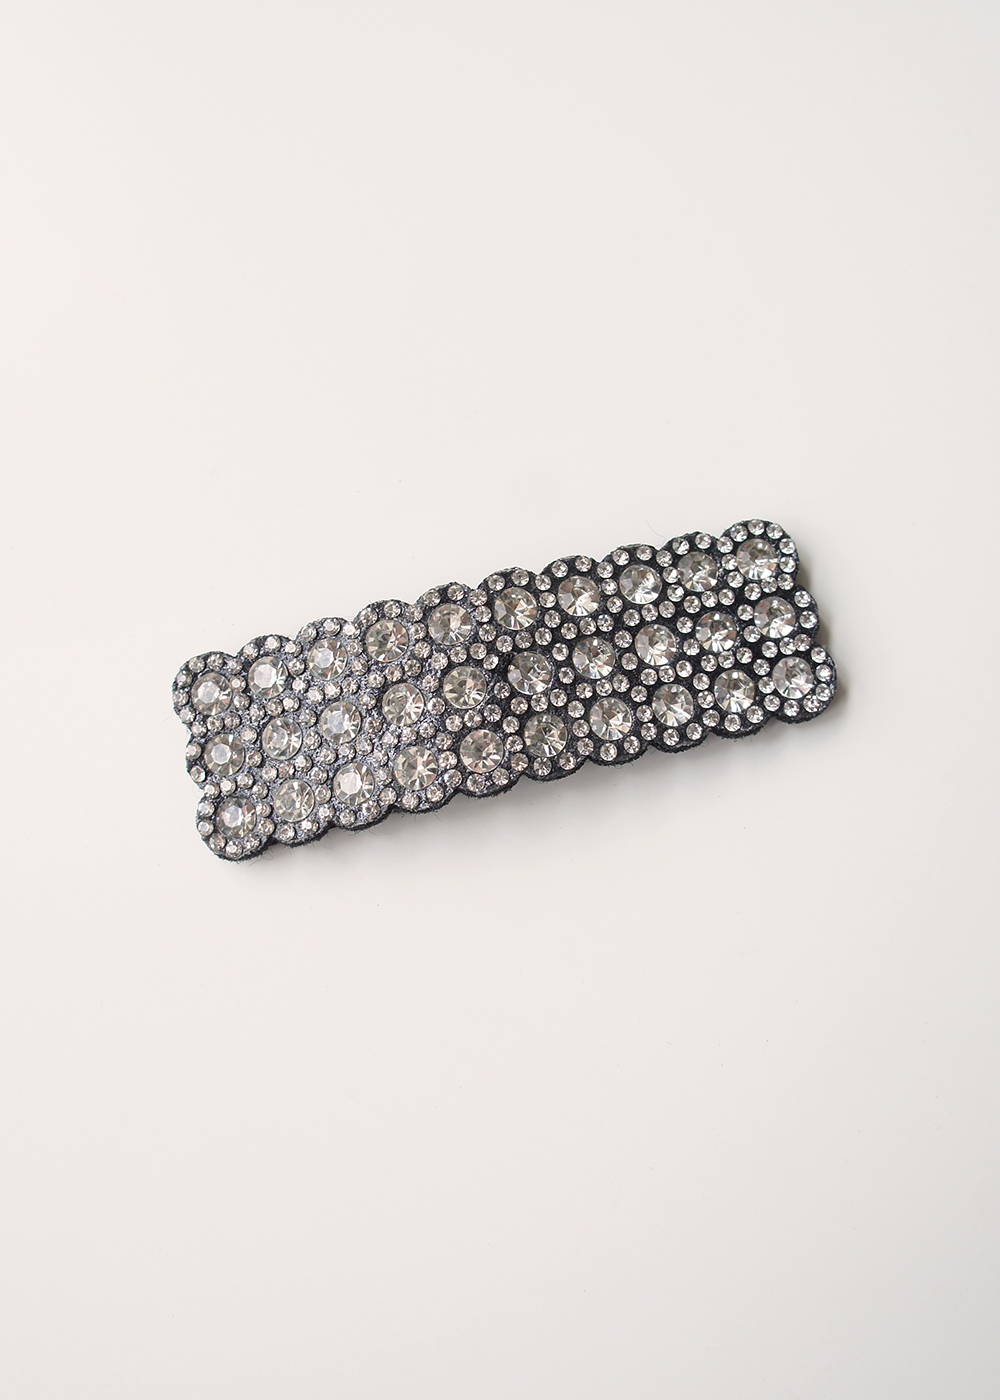 An oversized rectangular hair clip covered in different sized silver diamantés